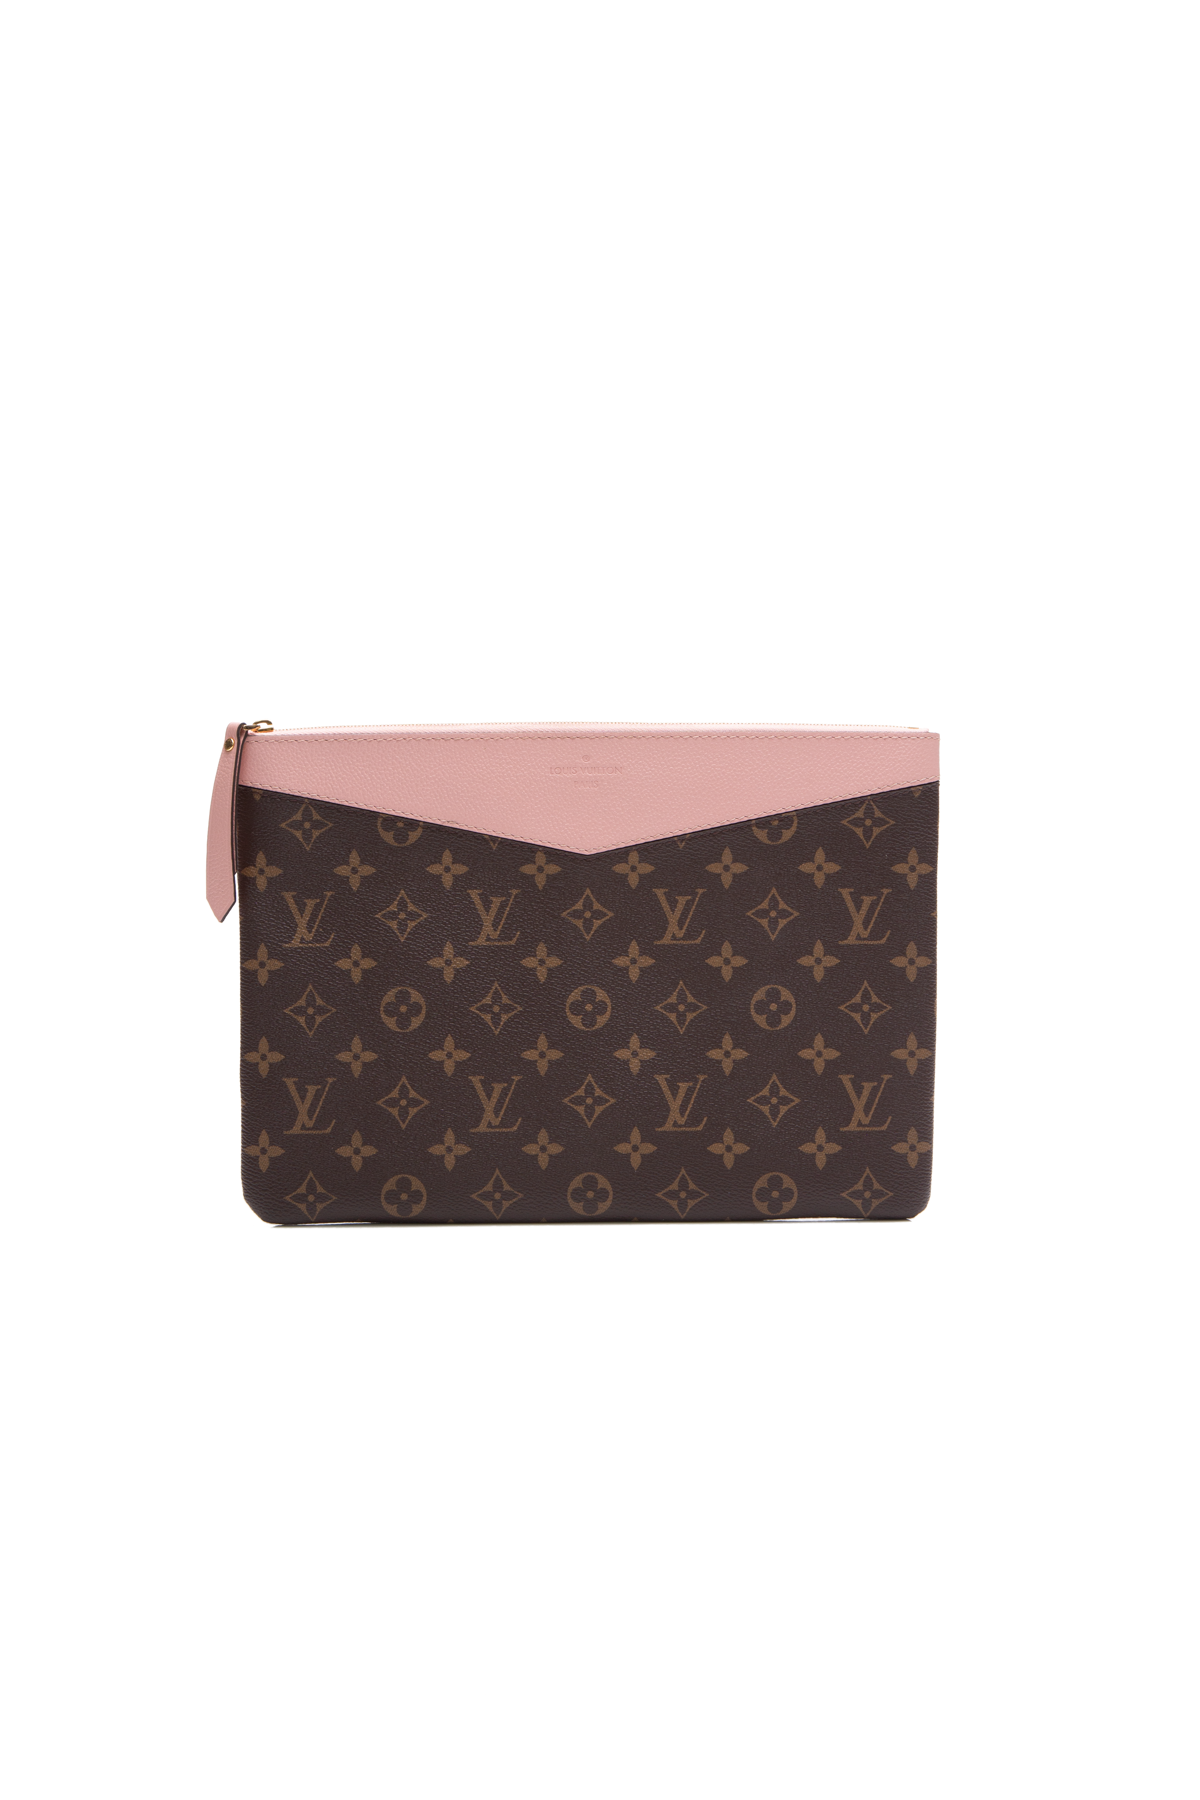 Louis Vuitton Monogram Canvas and Leather Daily Pouch Louis